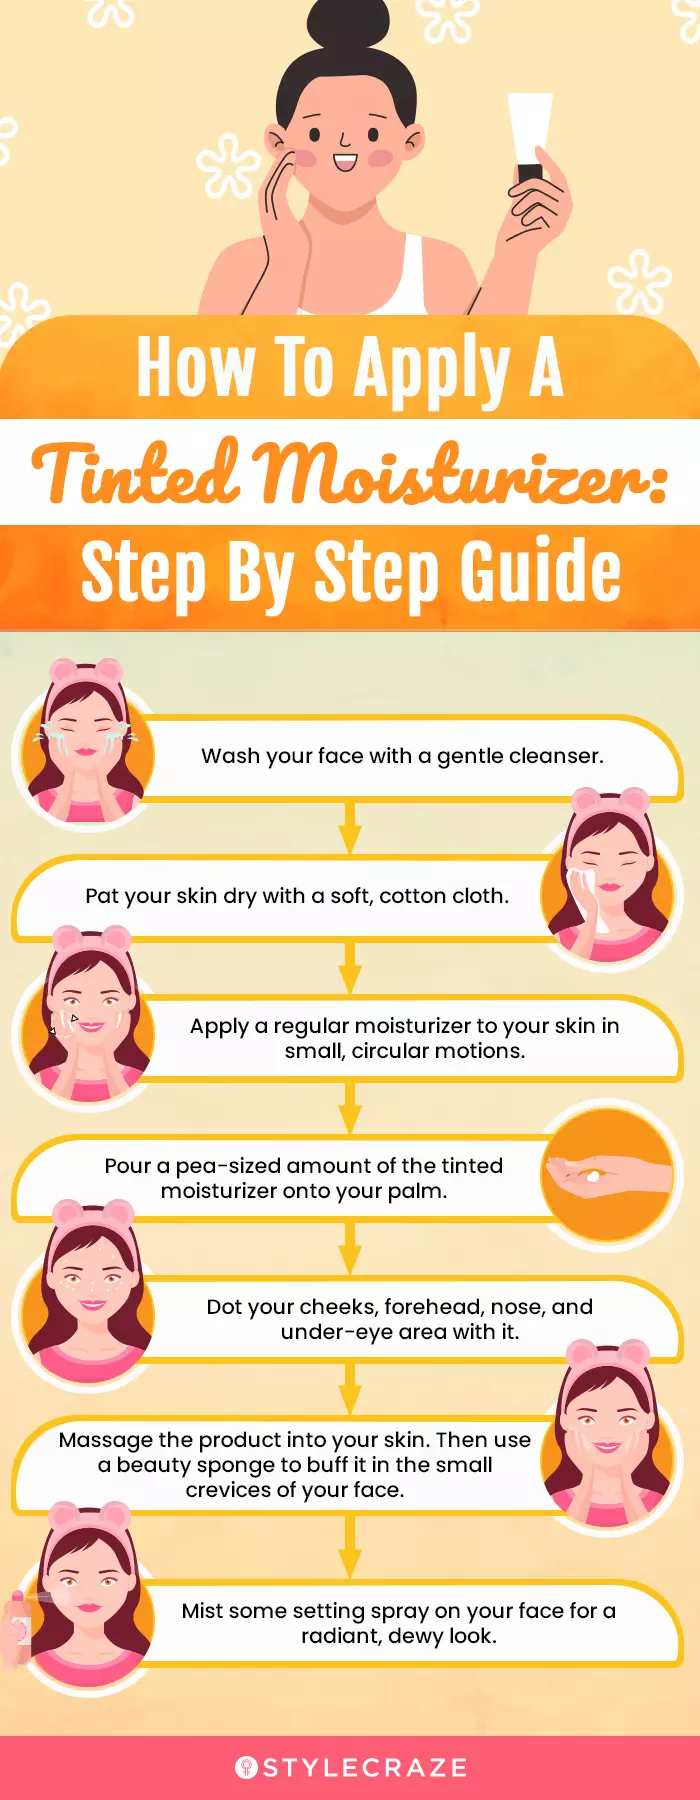 How To Apply A Tinted Moisturizer: Step By Step Guide (infographic)